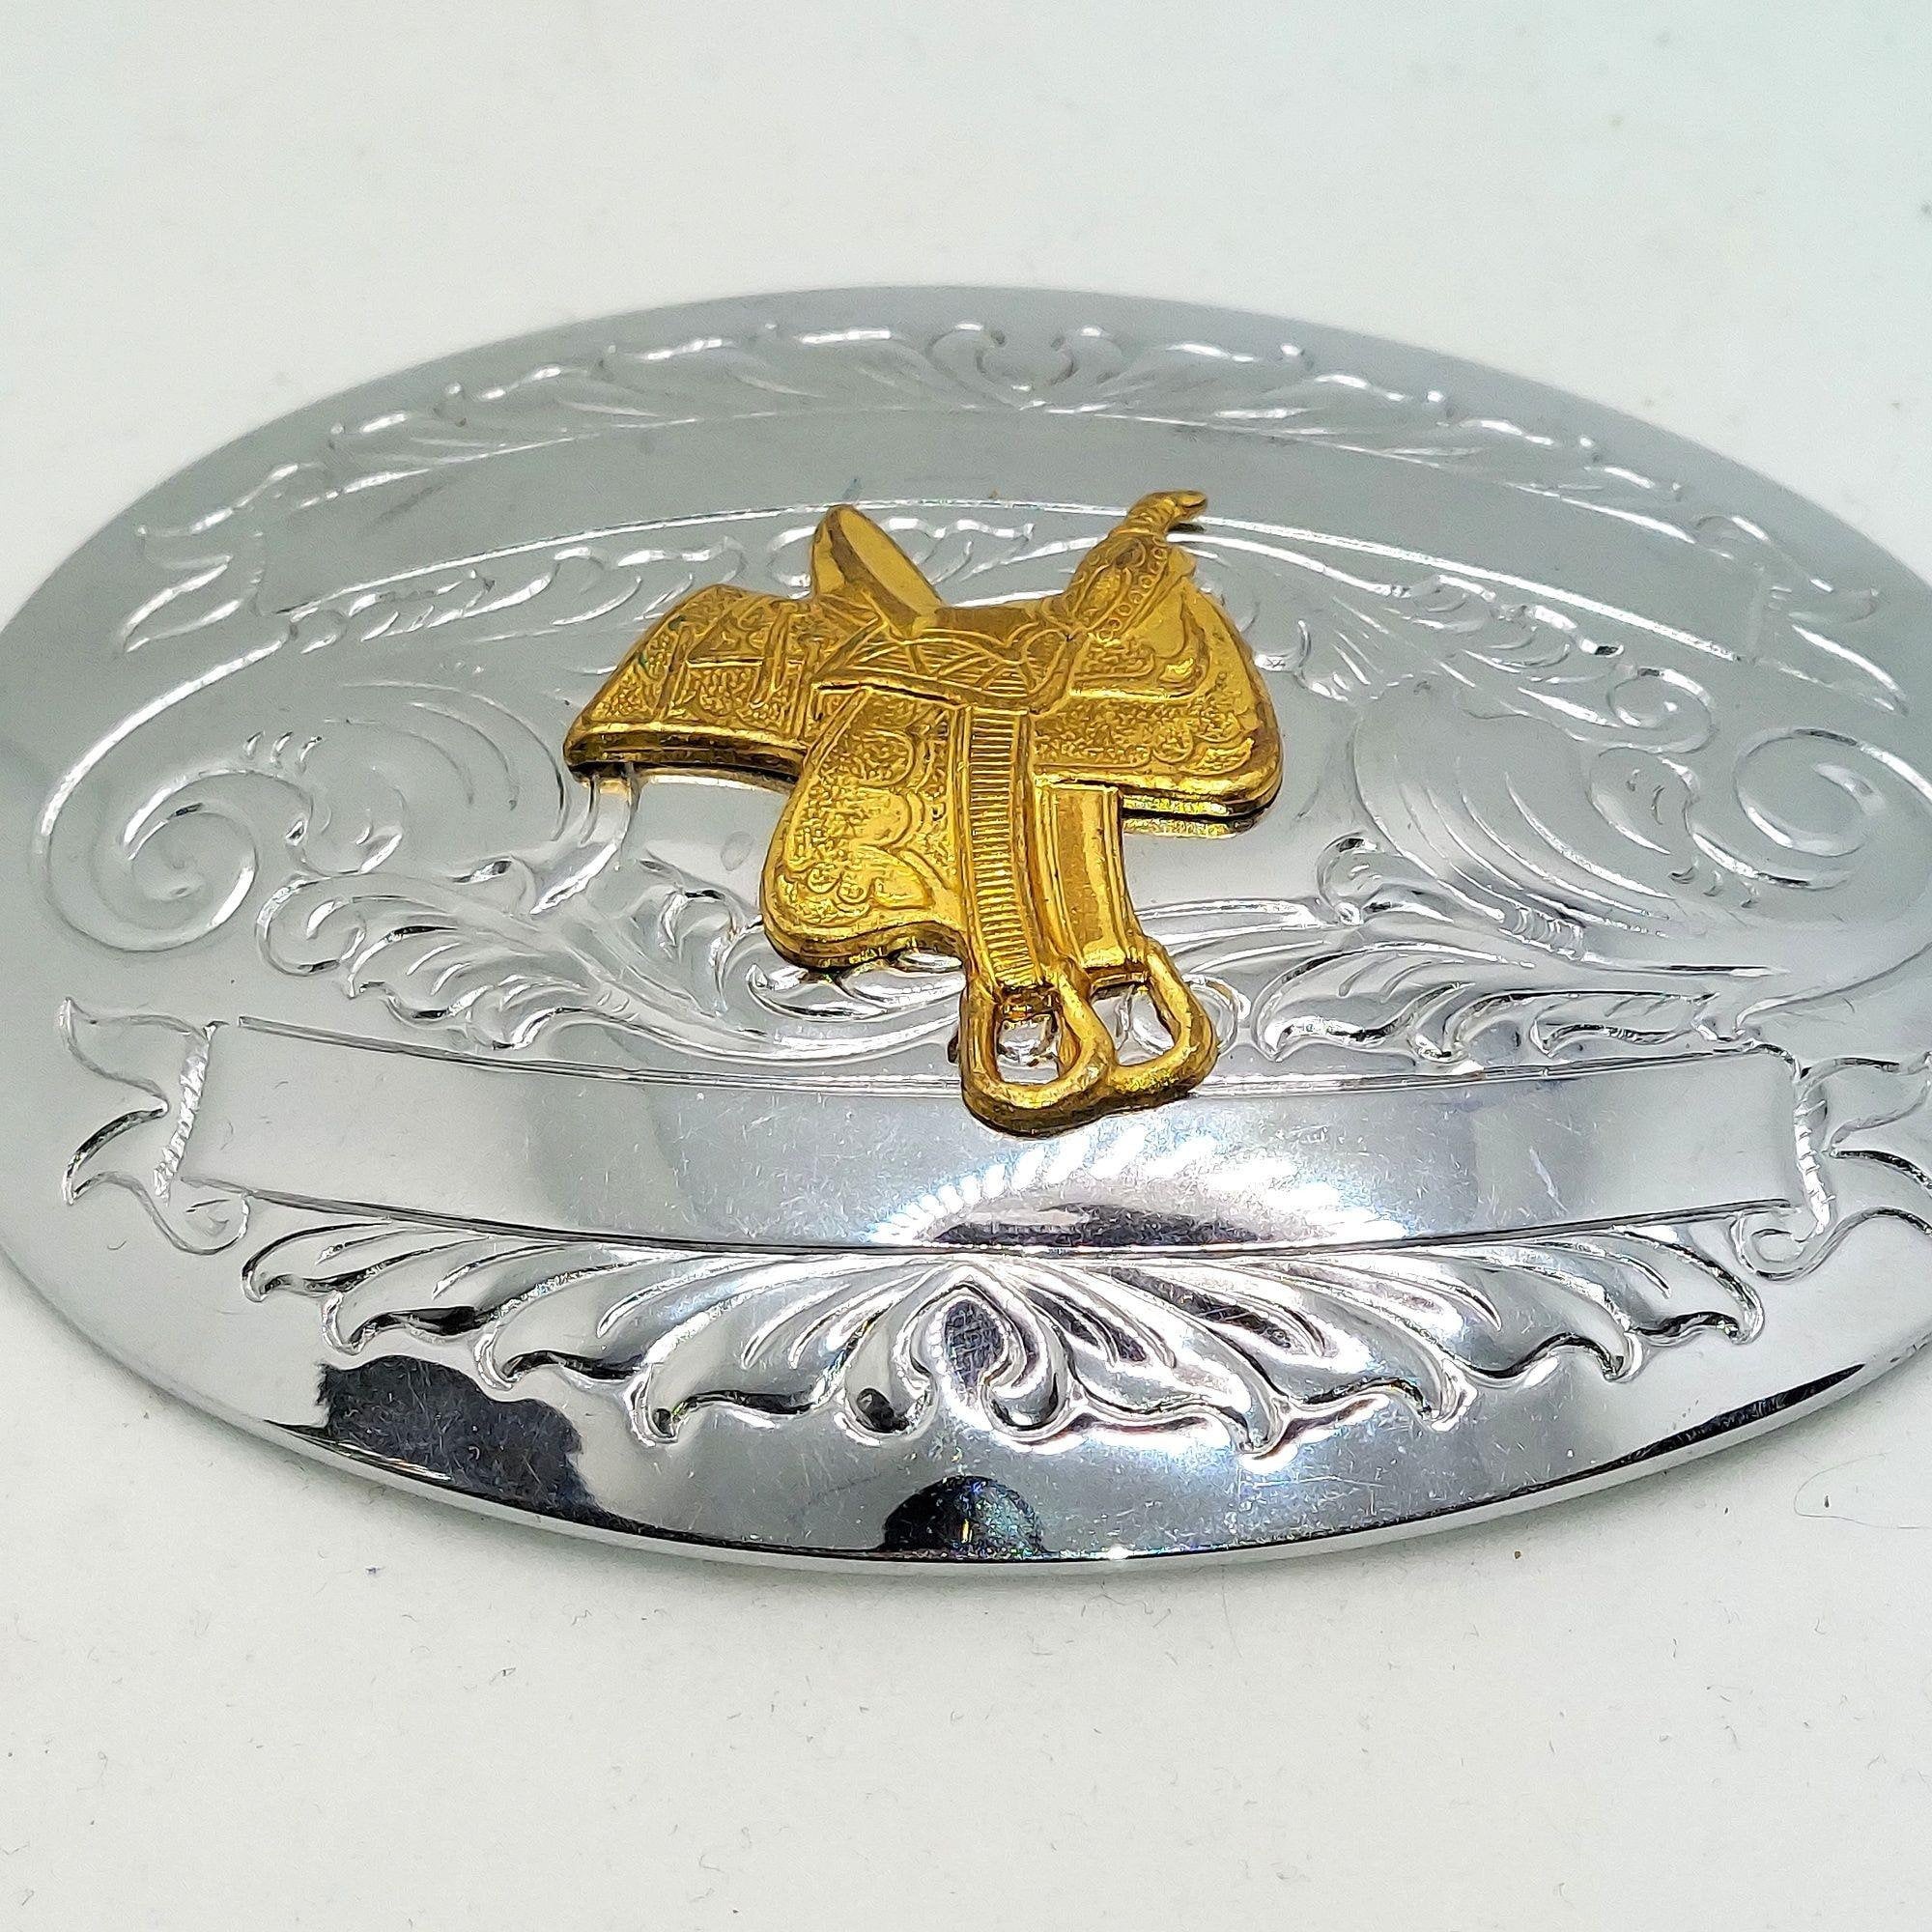 RODEO COWGIRL TRIPLE HEART WESTERN SILVER & GOLD PLATED TROPHY BELT BUCKLE 